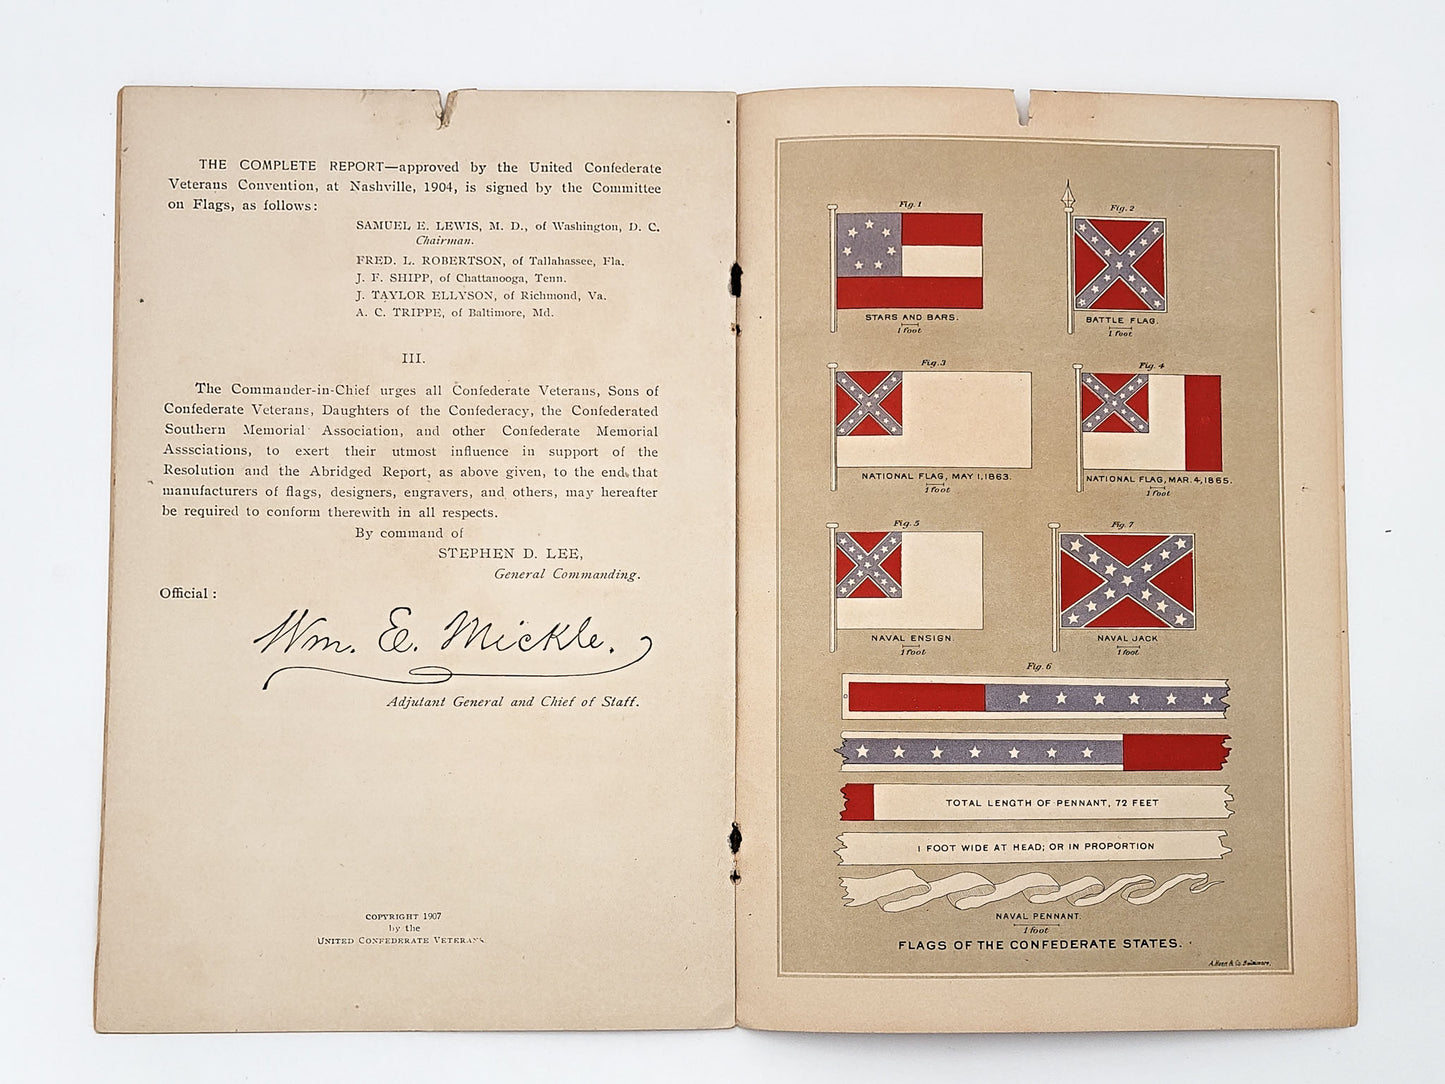 The Flags of the Confederate States of America